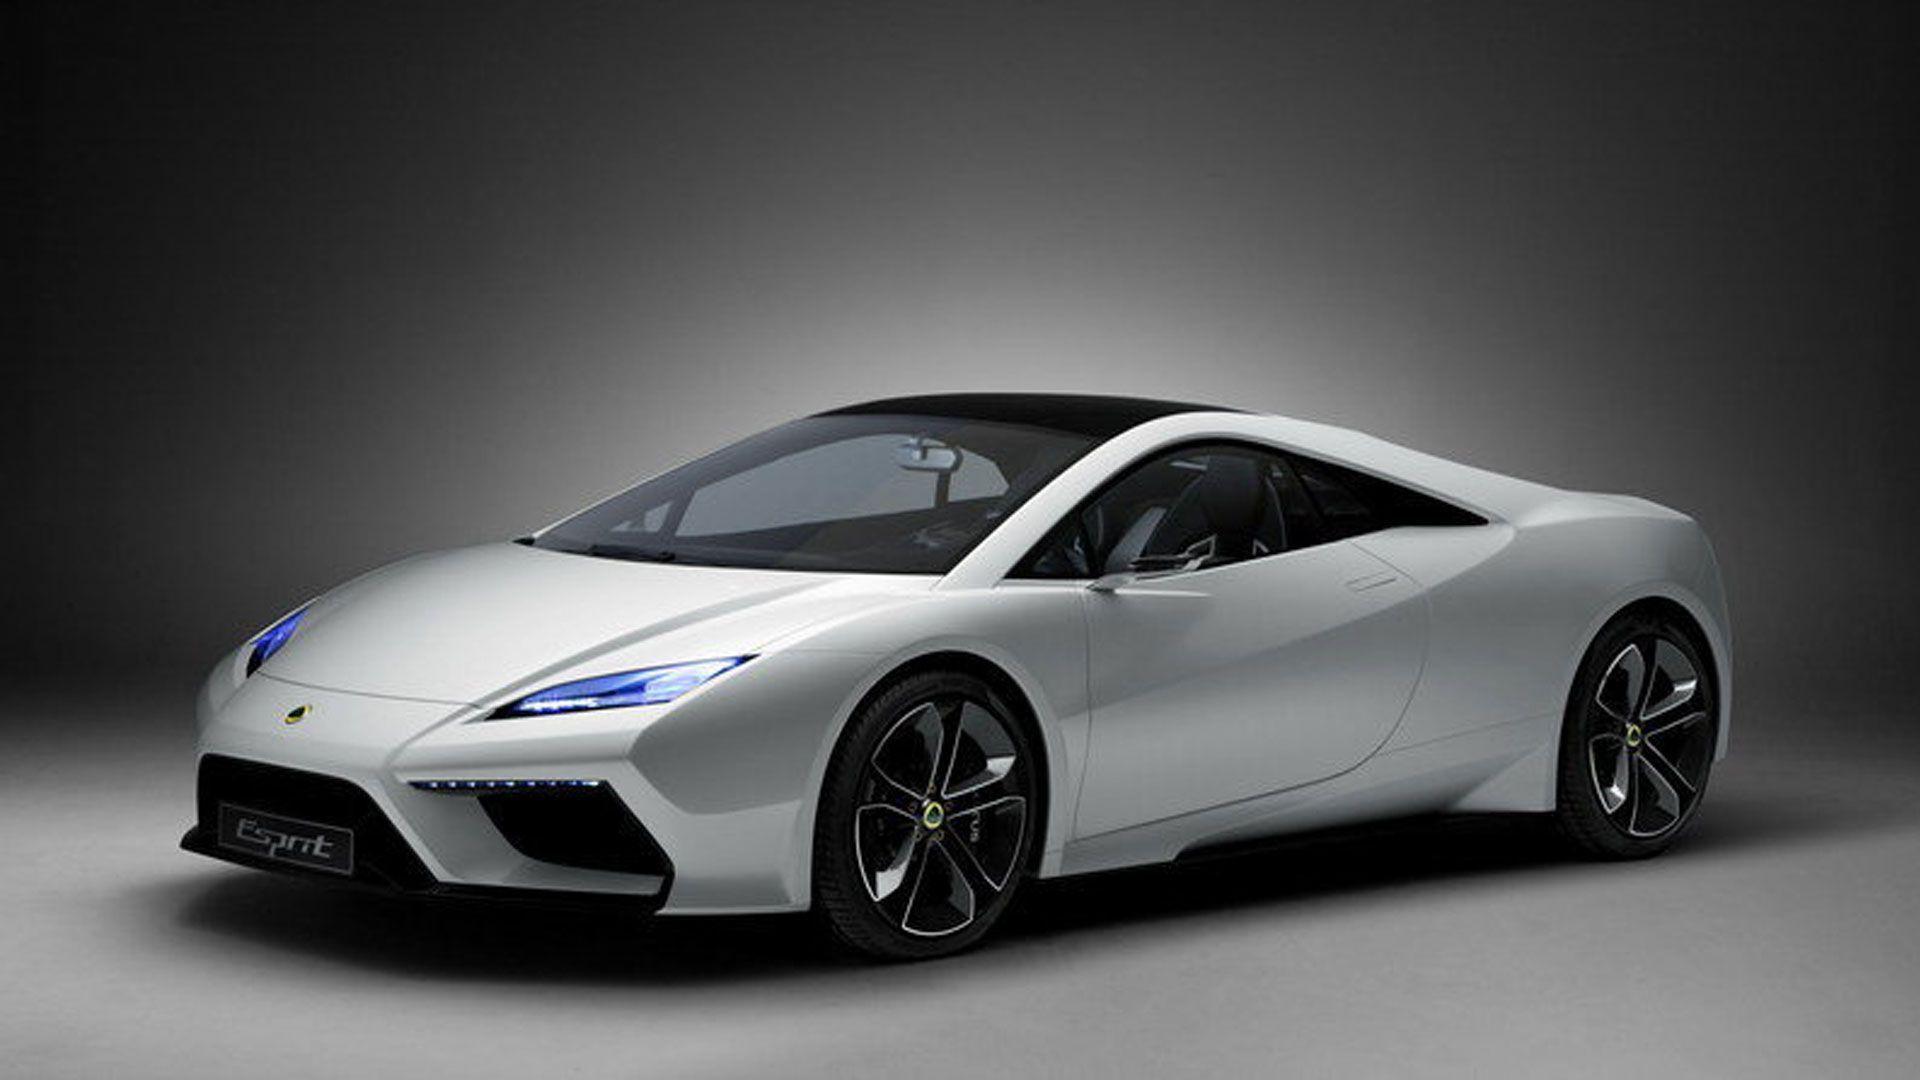 New Lotus Esprit Review and Specs